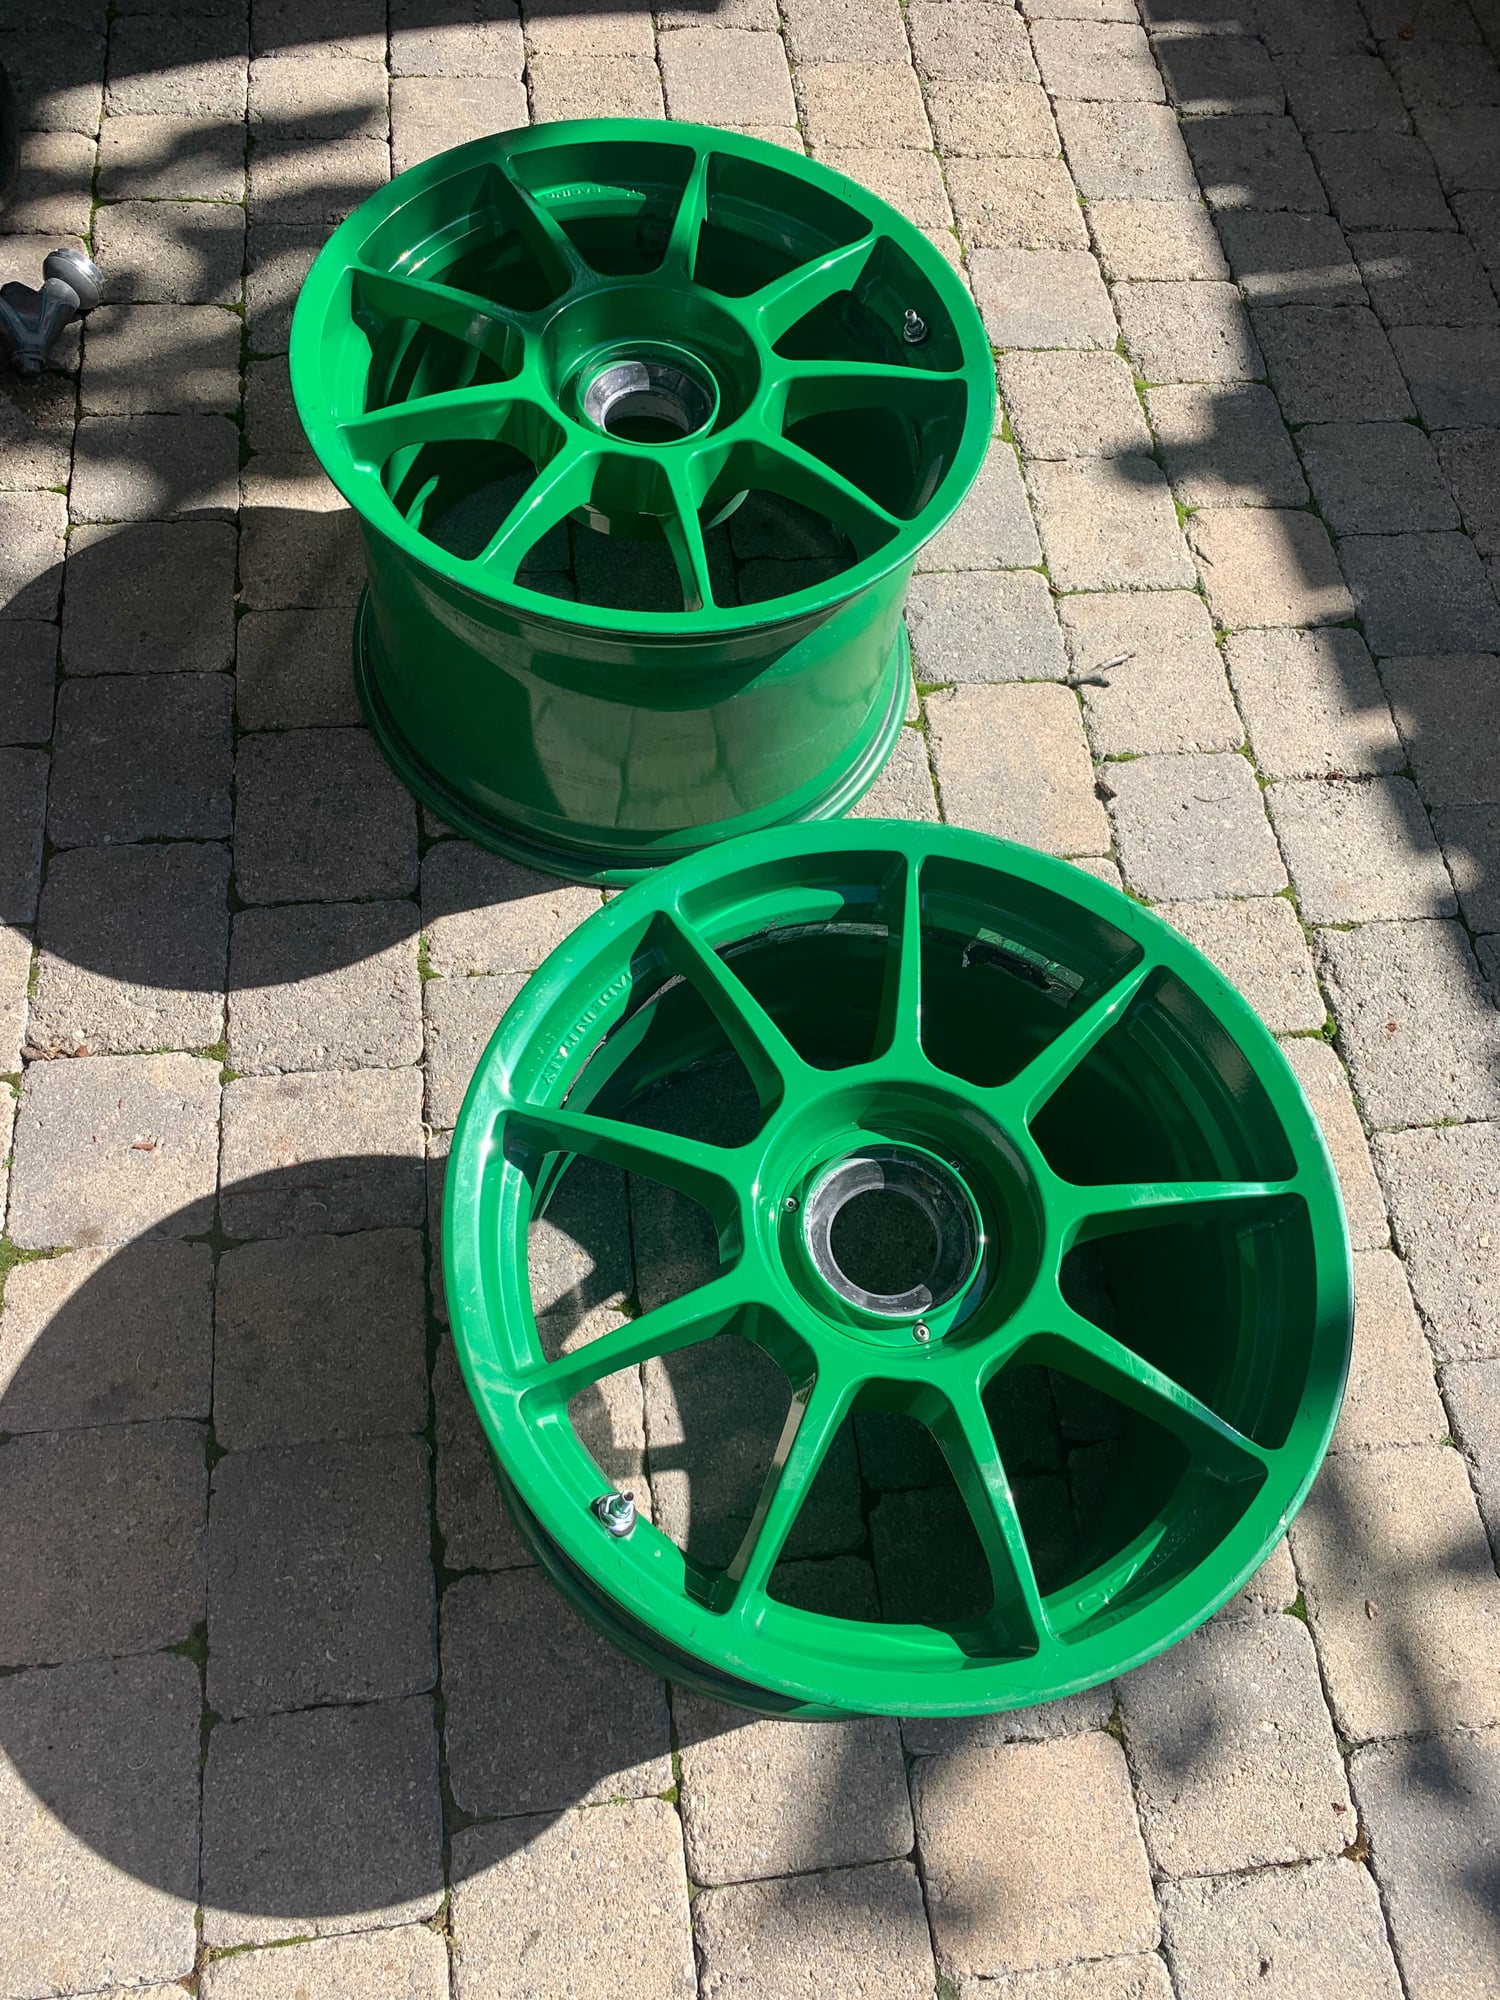 Wheels and Tires/Axles - 997.2 GT3, center lock 18inch OZ Racing wheels - Used - 2010 to 2011 Porsche GT3 - Champlain, NY 12919, United States